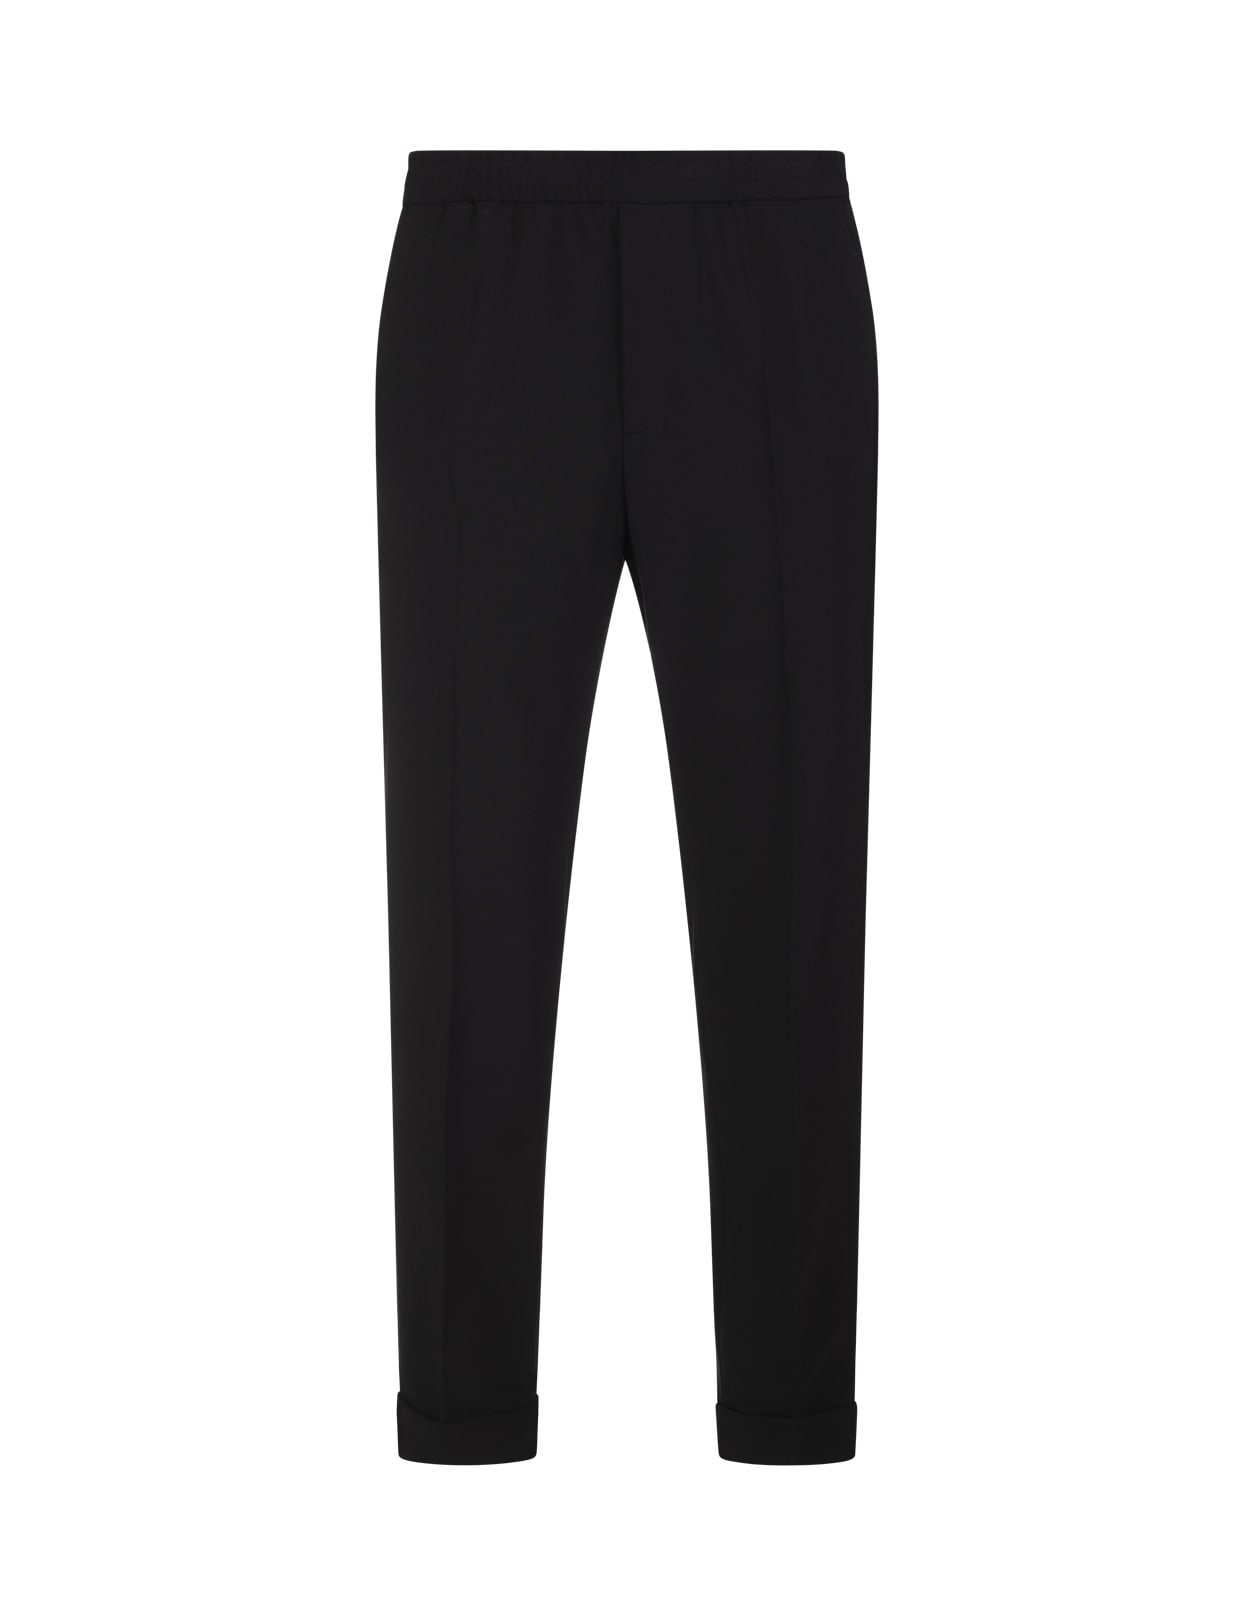 Neil Barrett Black Tailored Trousers With Elasticated Waistband